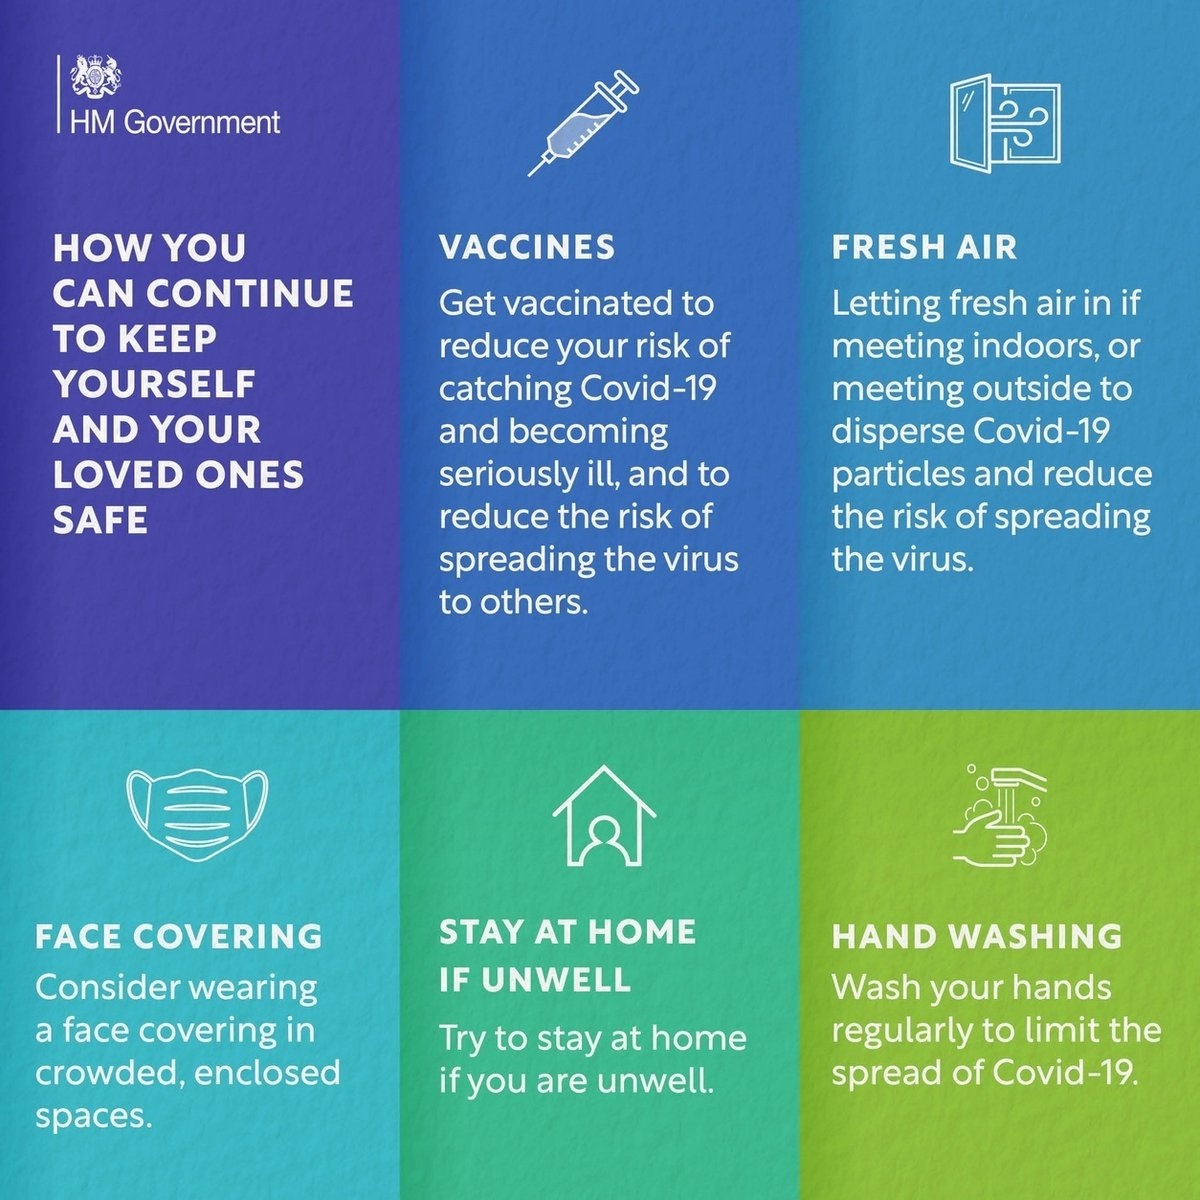 As we learn to live with Covid, the government advises that there are certain things we can all do to limit infection and keep one another safe. Find out more at orlo.uk/nouuC